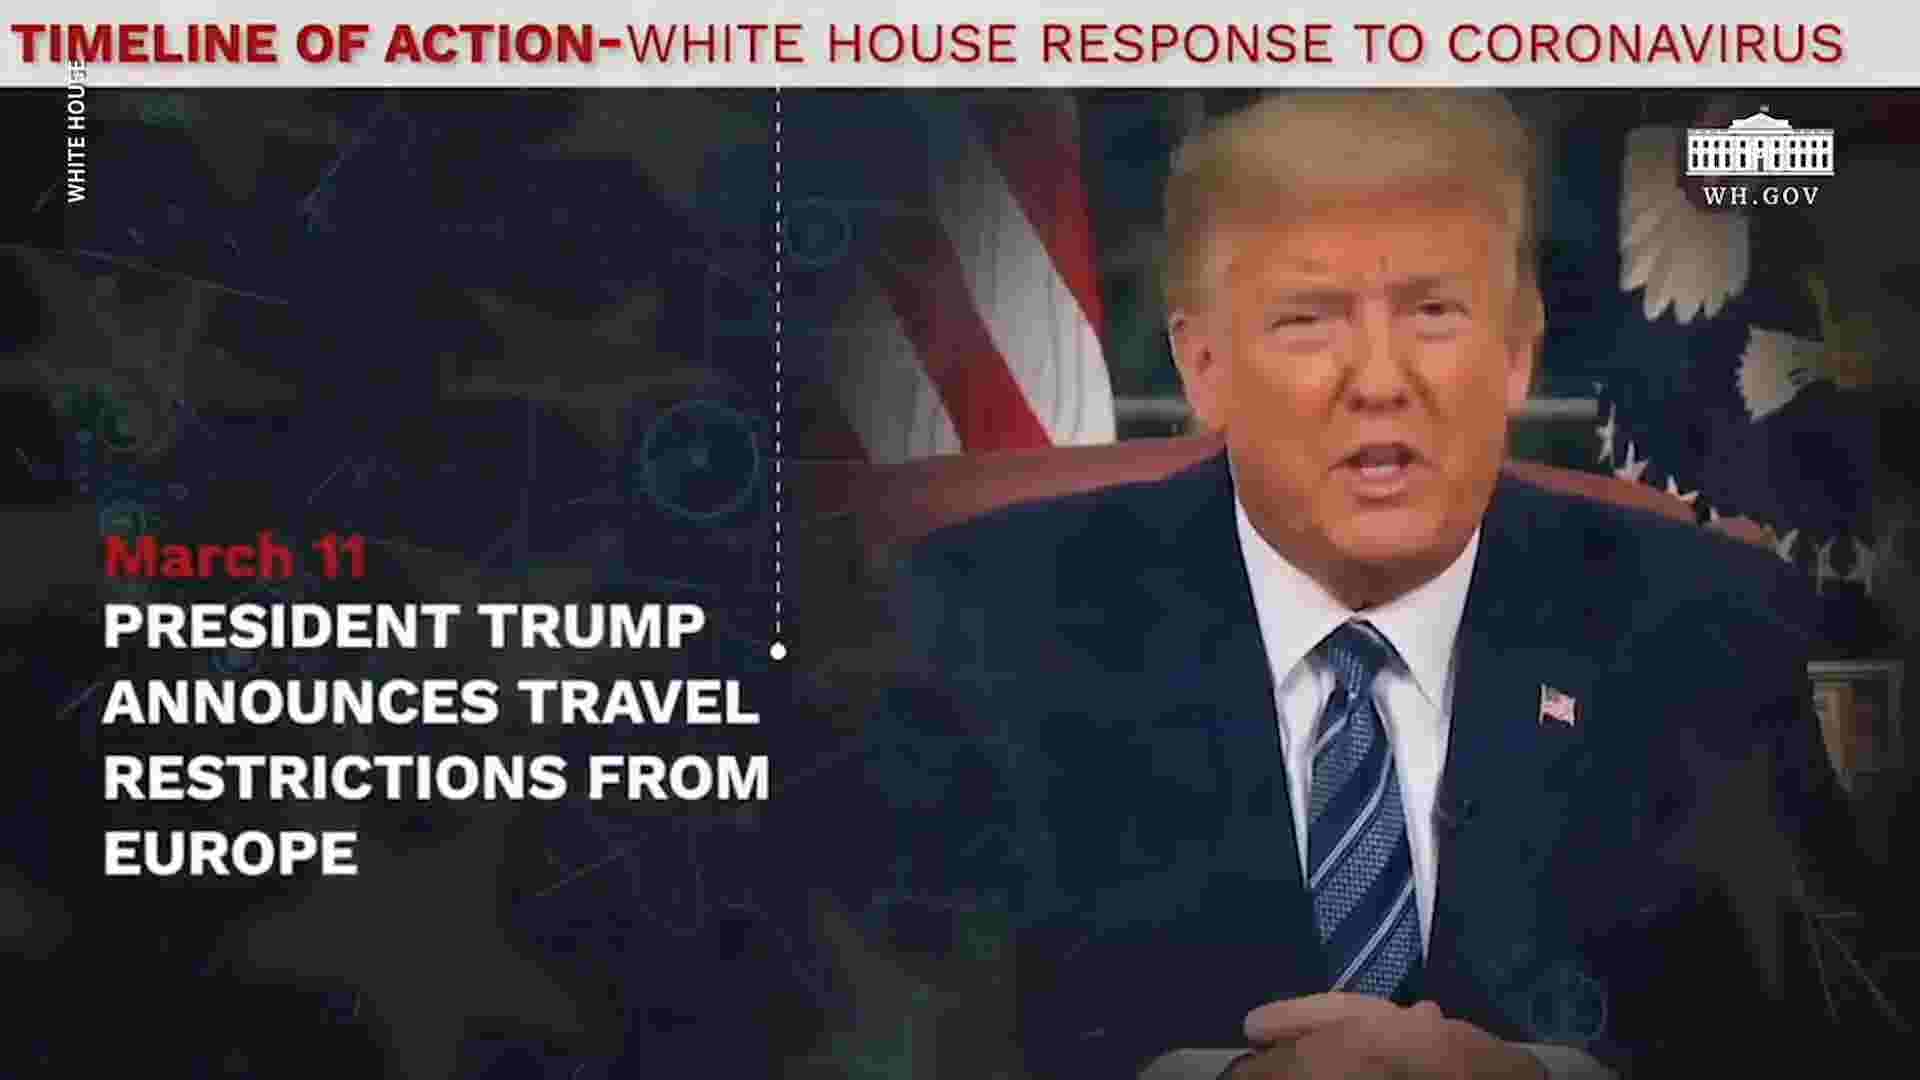 President Donald Trump's campaignstyle video omits details, context